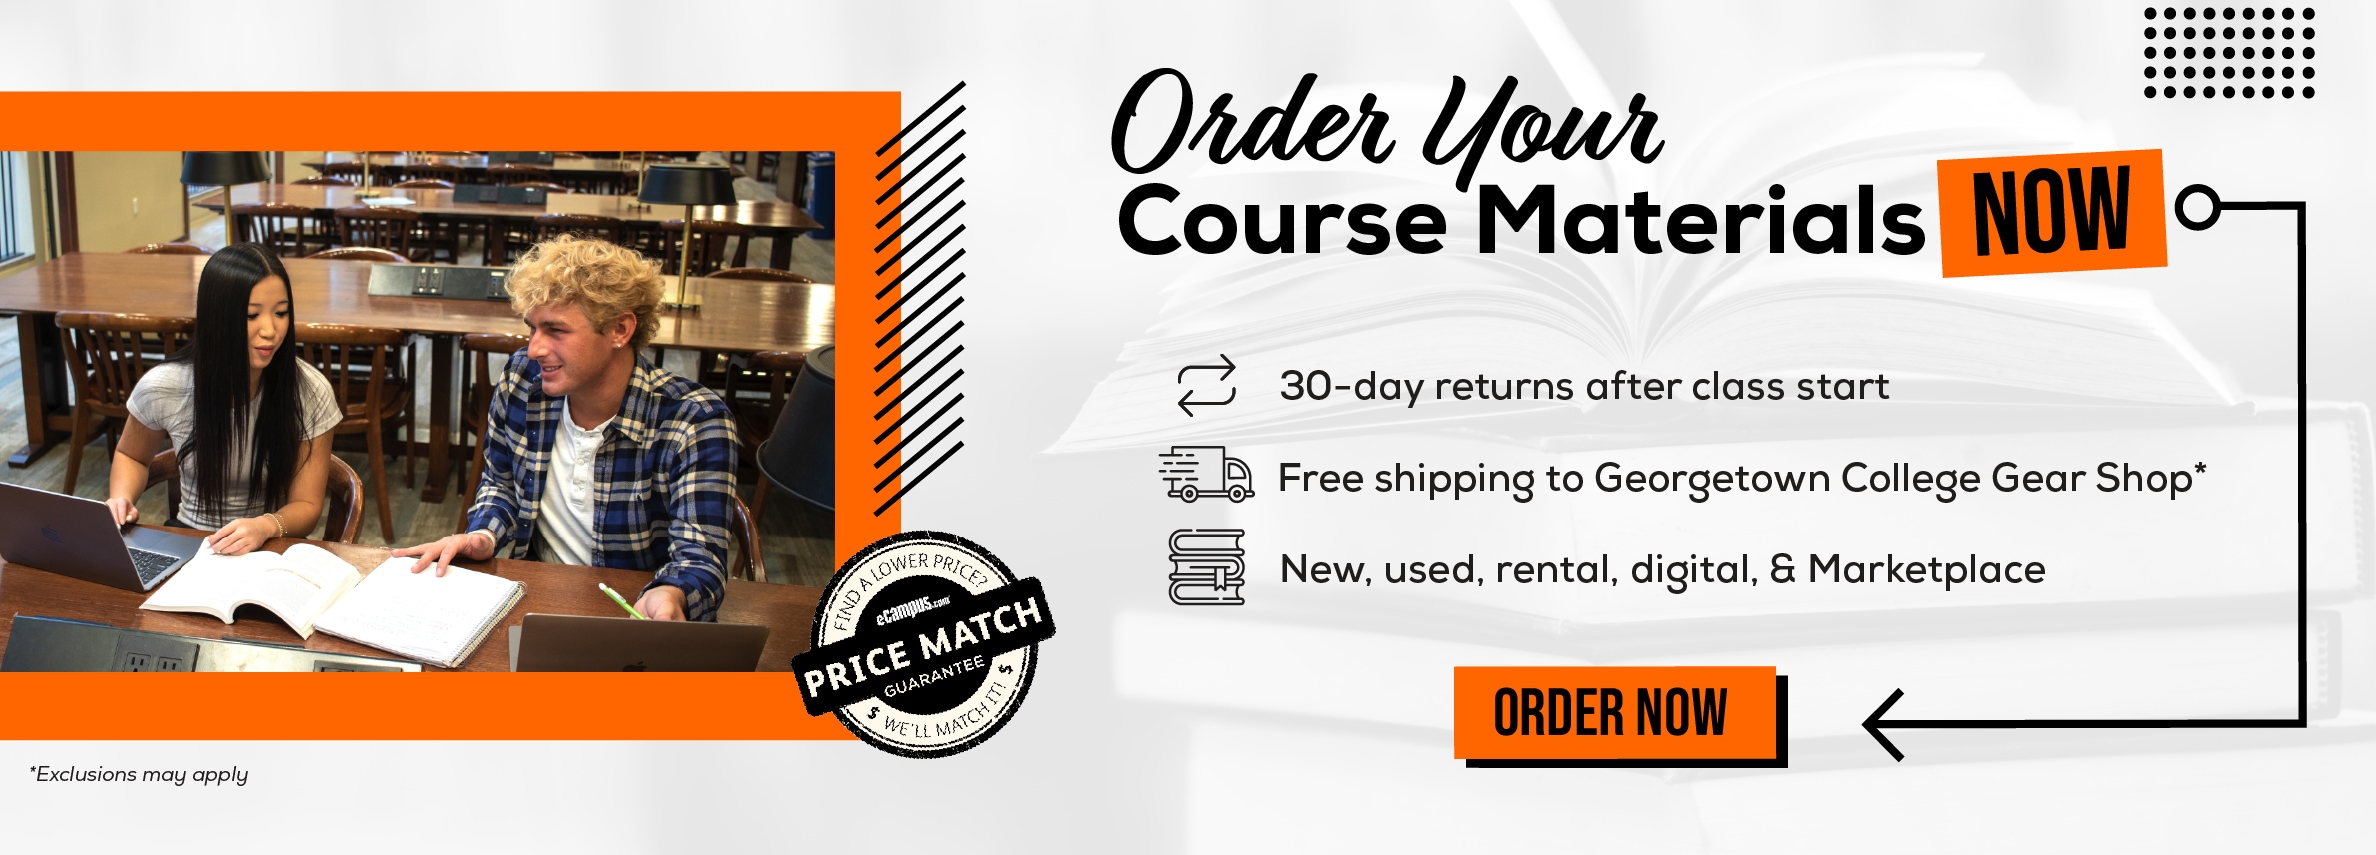 Order Your Course Materials Now. 30-day returns after class start. Free shipping to Georgetown College Gear Shop* New, used, rental, digital, & Marketplace. Order now. *Exclusions may apply.